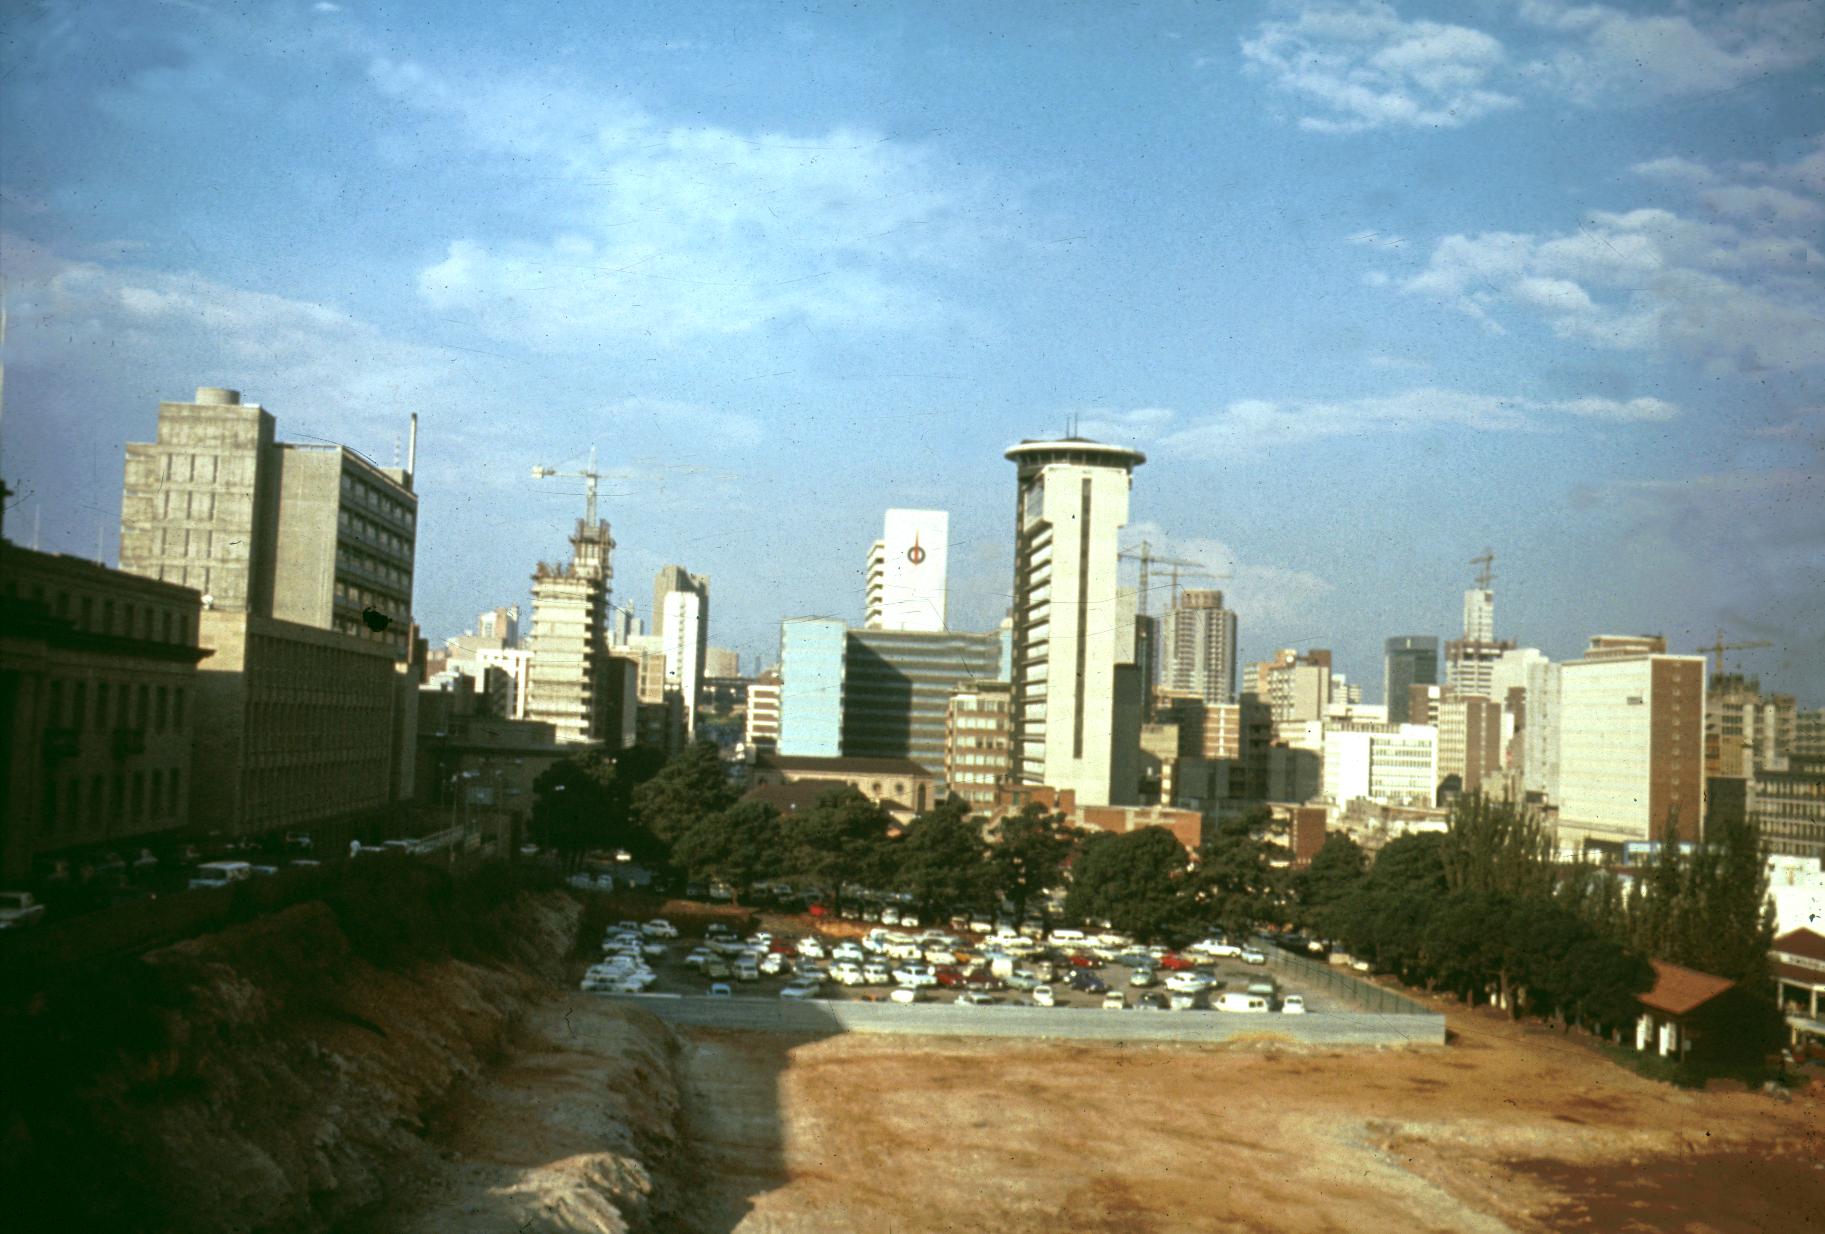 Skyline of Johannesburg as Seen from University of Witwatersrand